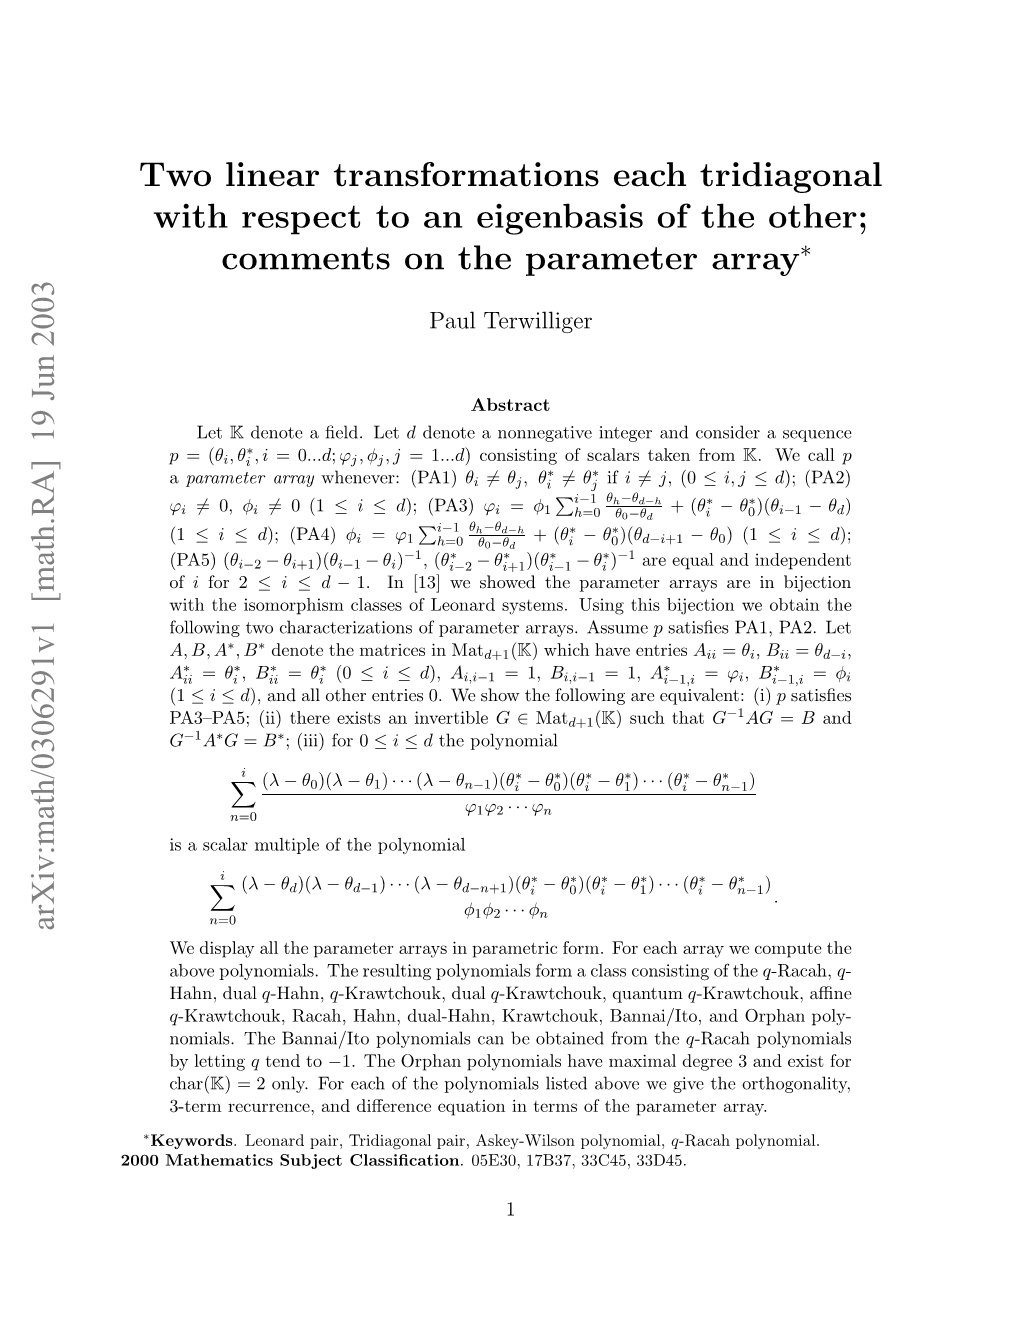 [Math.RA] 19 Jun 2003 Two Linear Transformations Each Tridiagonal with Respect to an Eigenbasis of the Ot